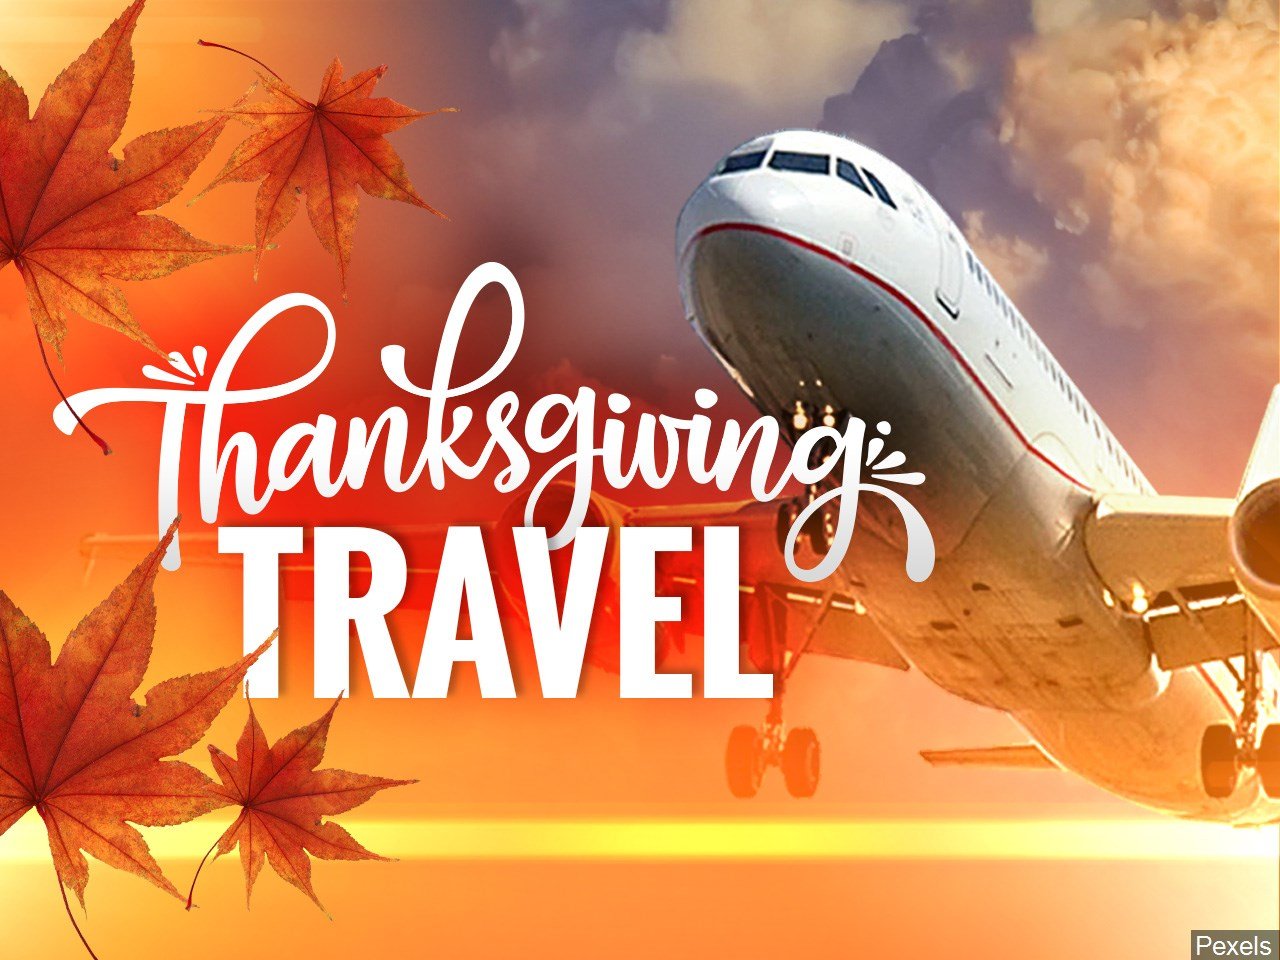 Airlines adding more flights, anticipating Thanksgiving travel